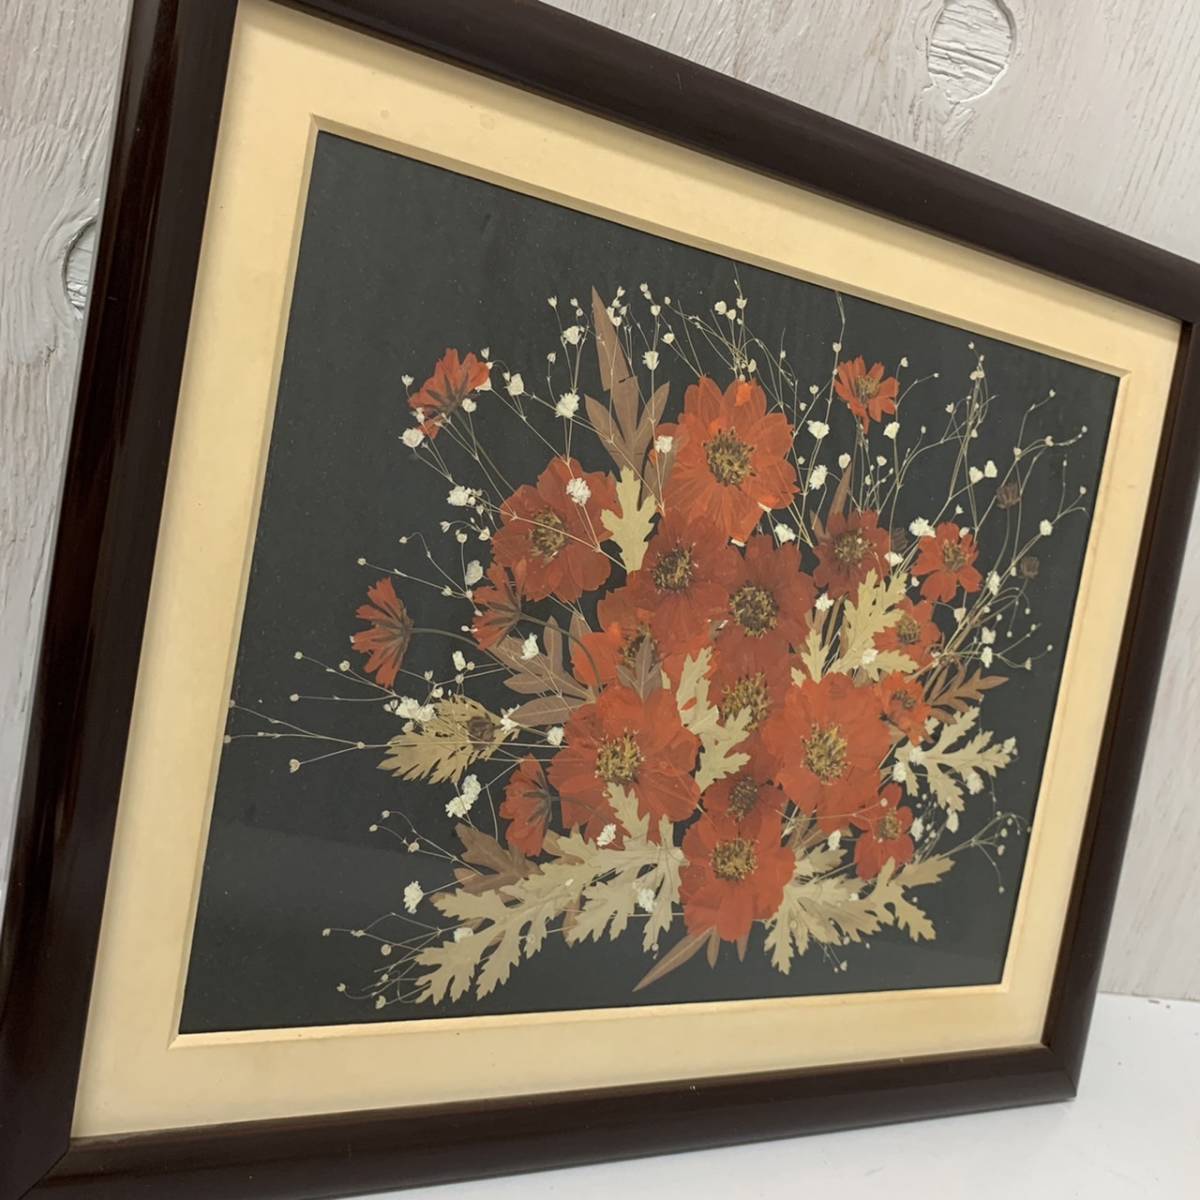  flower art pressed flower amount picture picture frame ornament decoration interior antique .... flower club 2 point together 